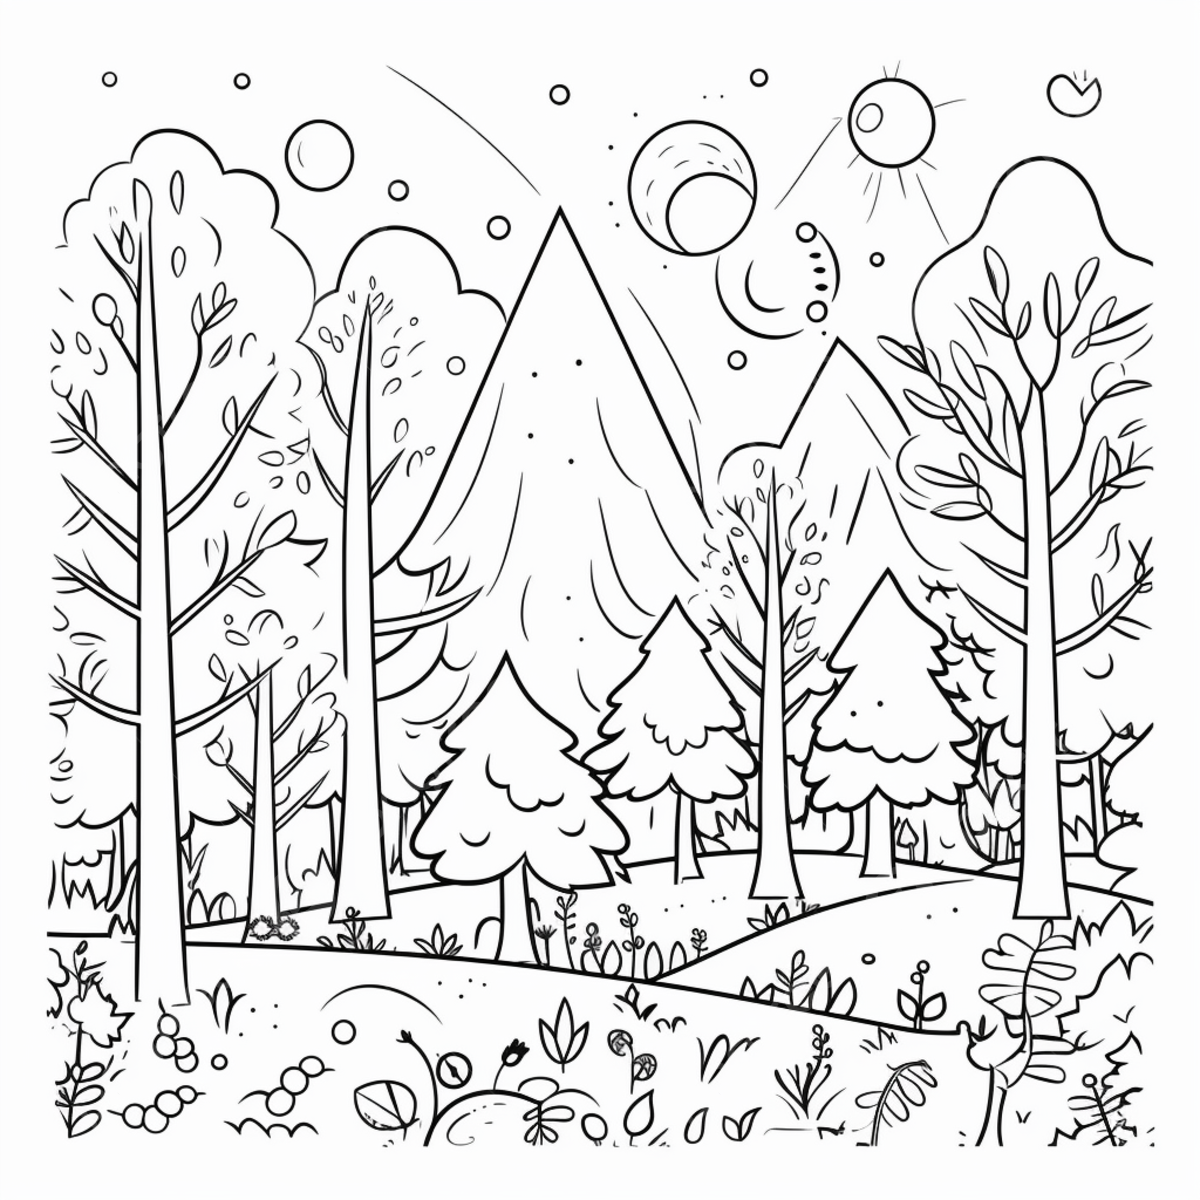 Tree coloring pages fresh best of coloring pages of trees tree drawing ring drawing trees drawing png transparent image and clipart for free download